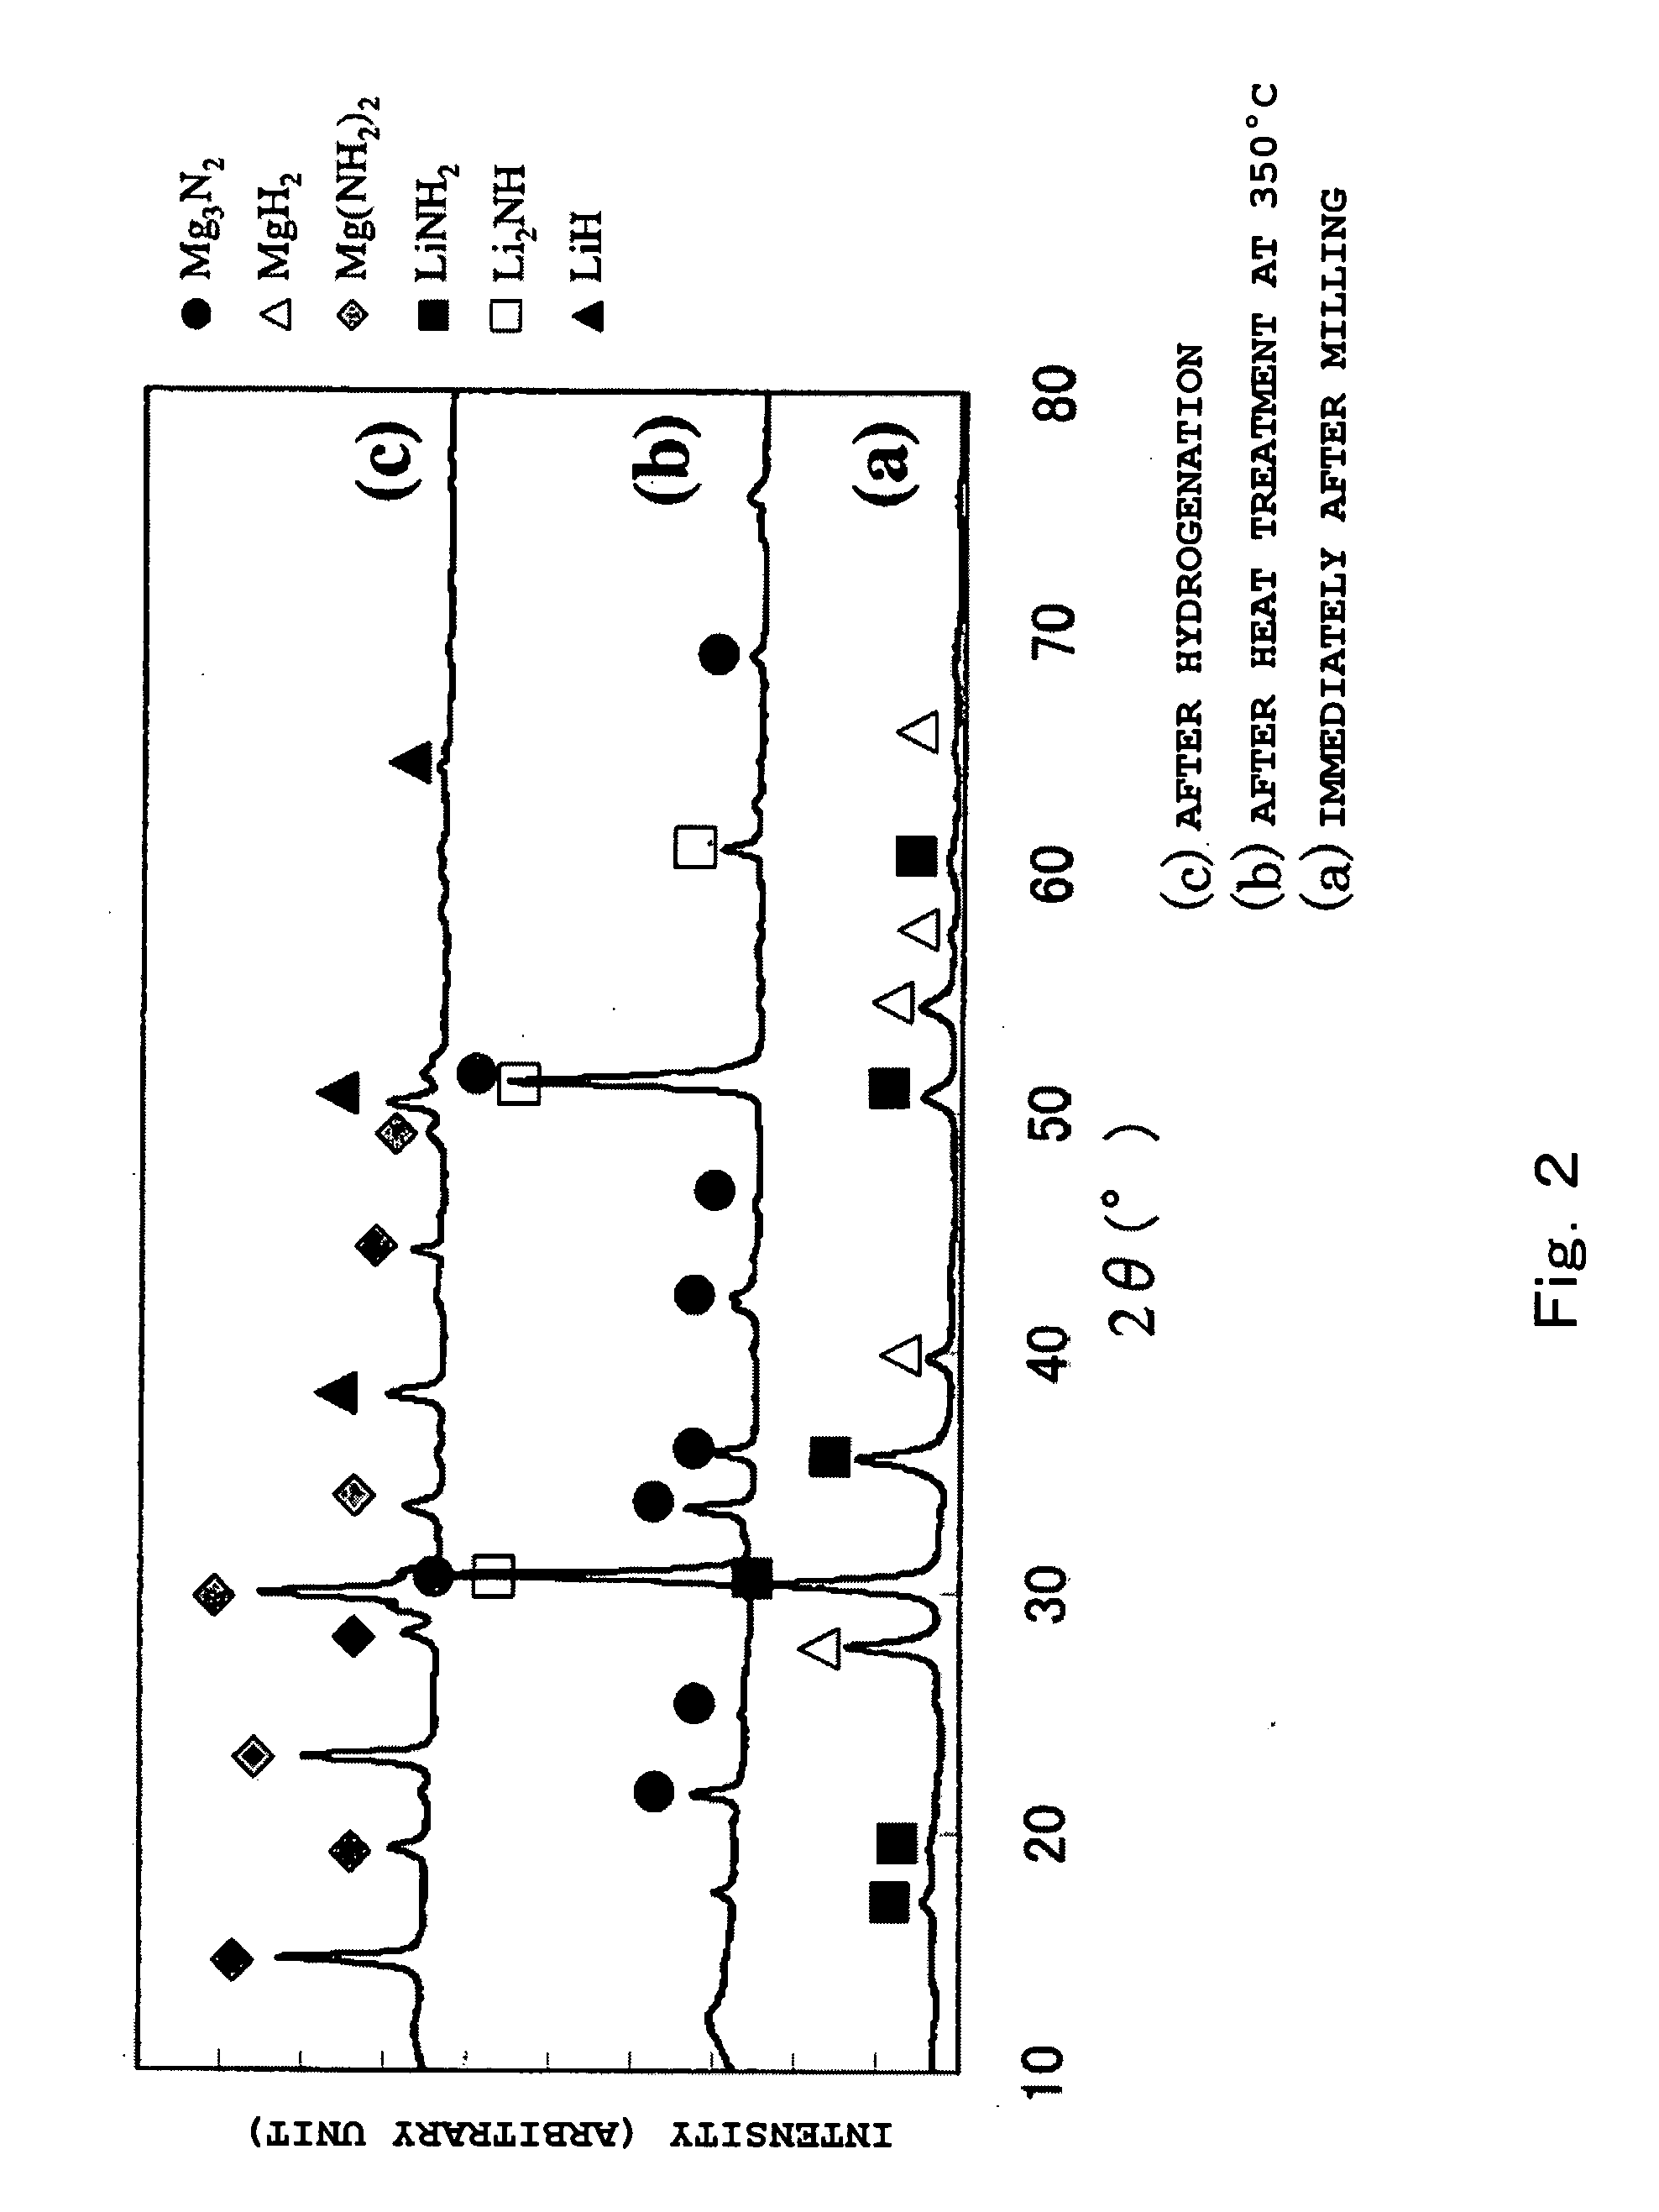 Hydrogen storage material and method for manufacturing same